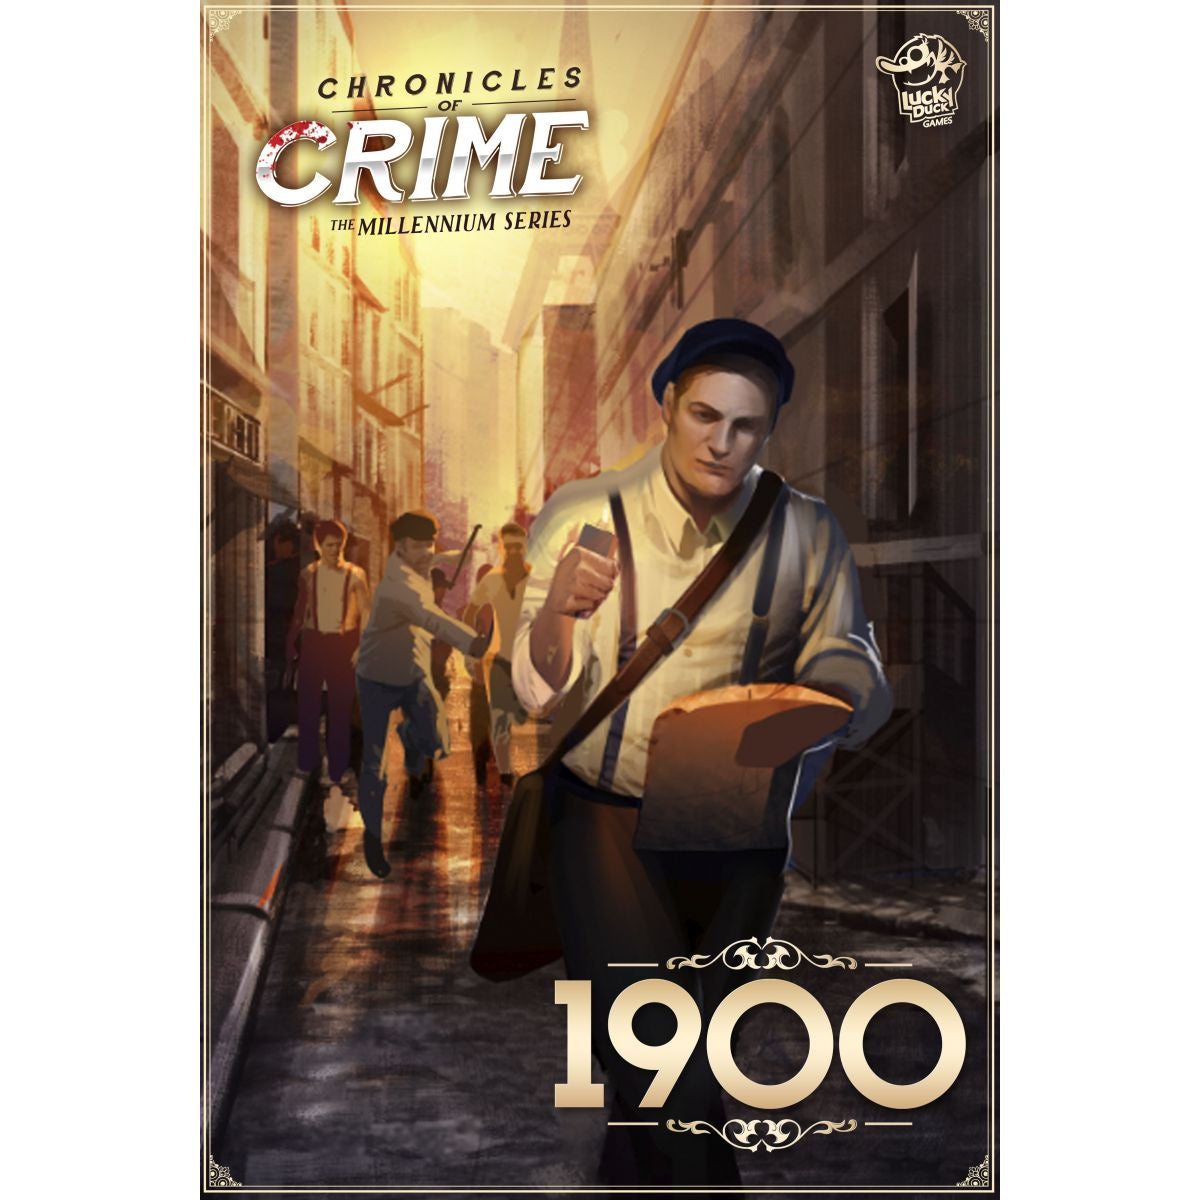 Chronicles of Crime - The Millienium Series 1900